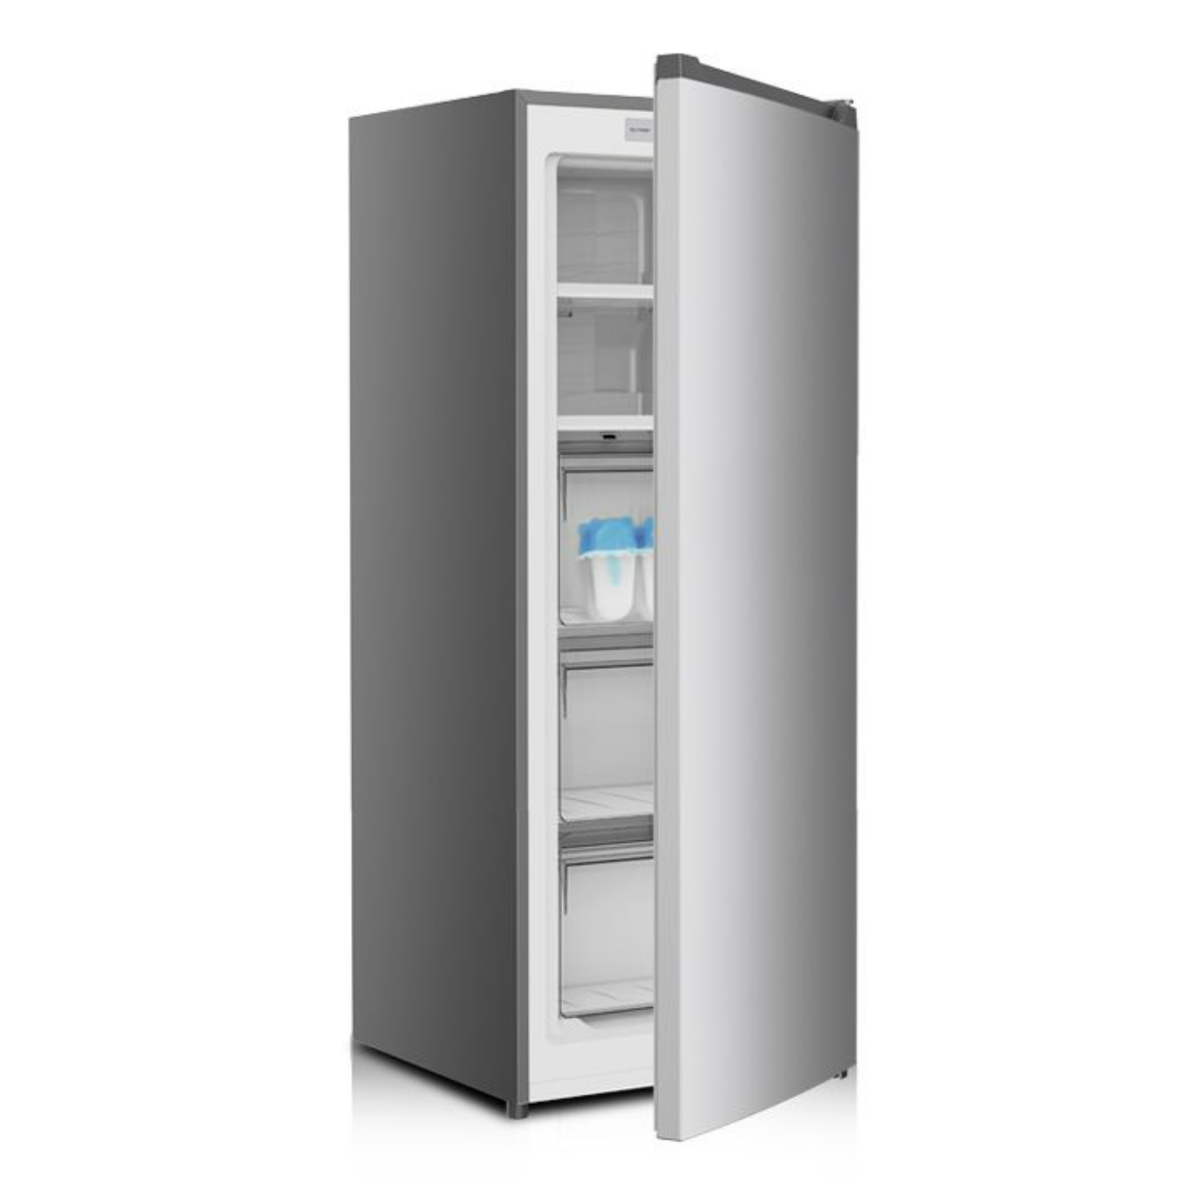 Oscar Up Right Freezer, 135 L, Silver, OUF 190 NGHS